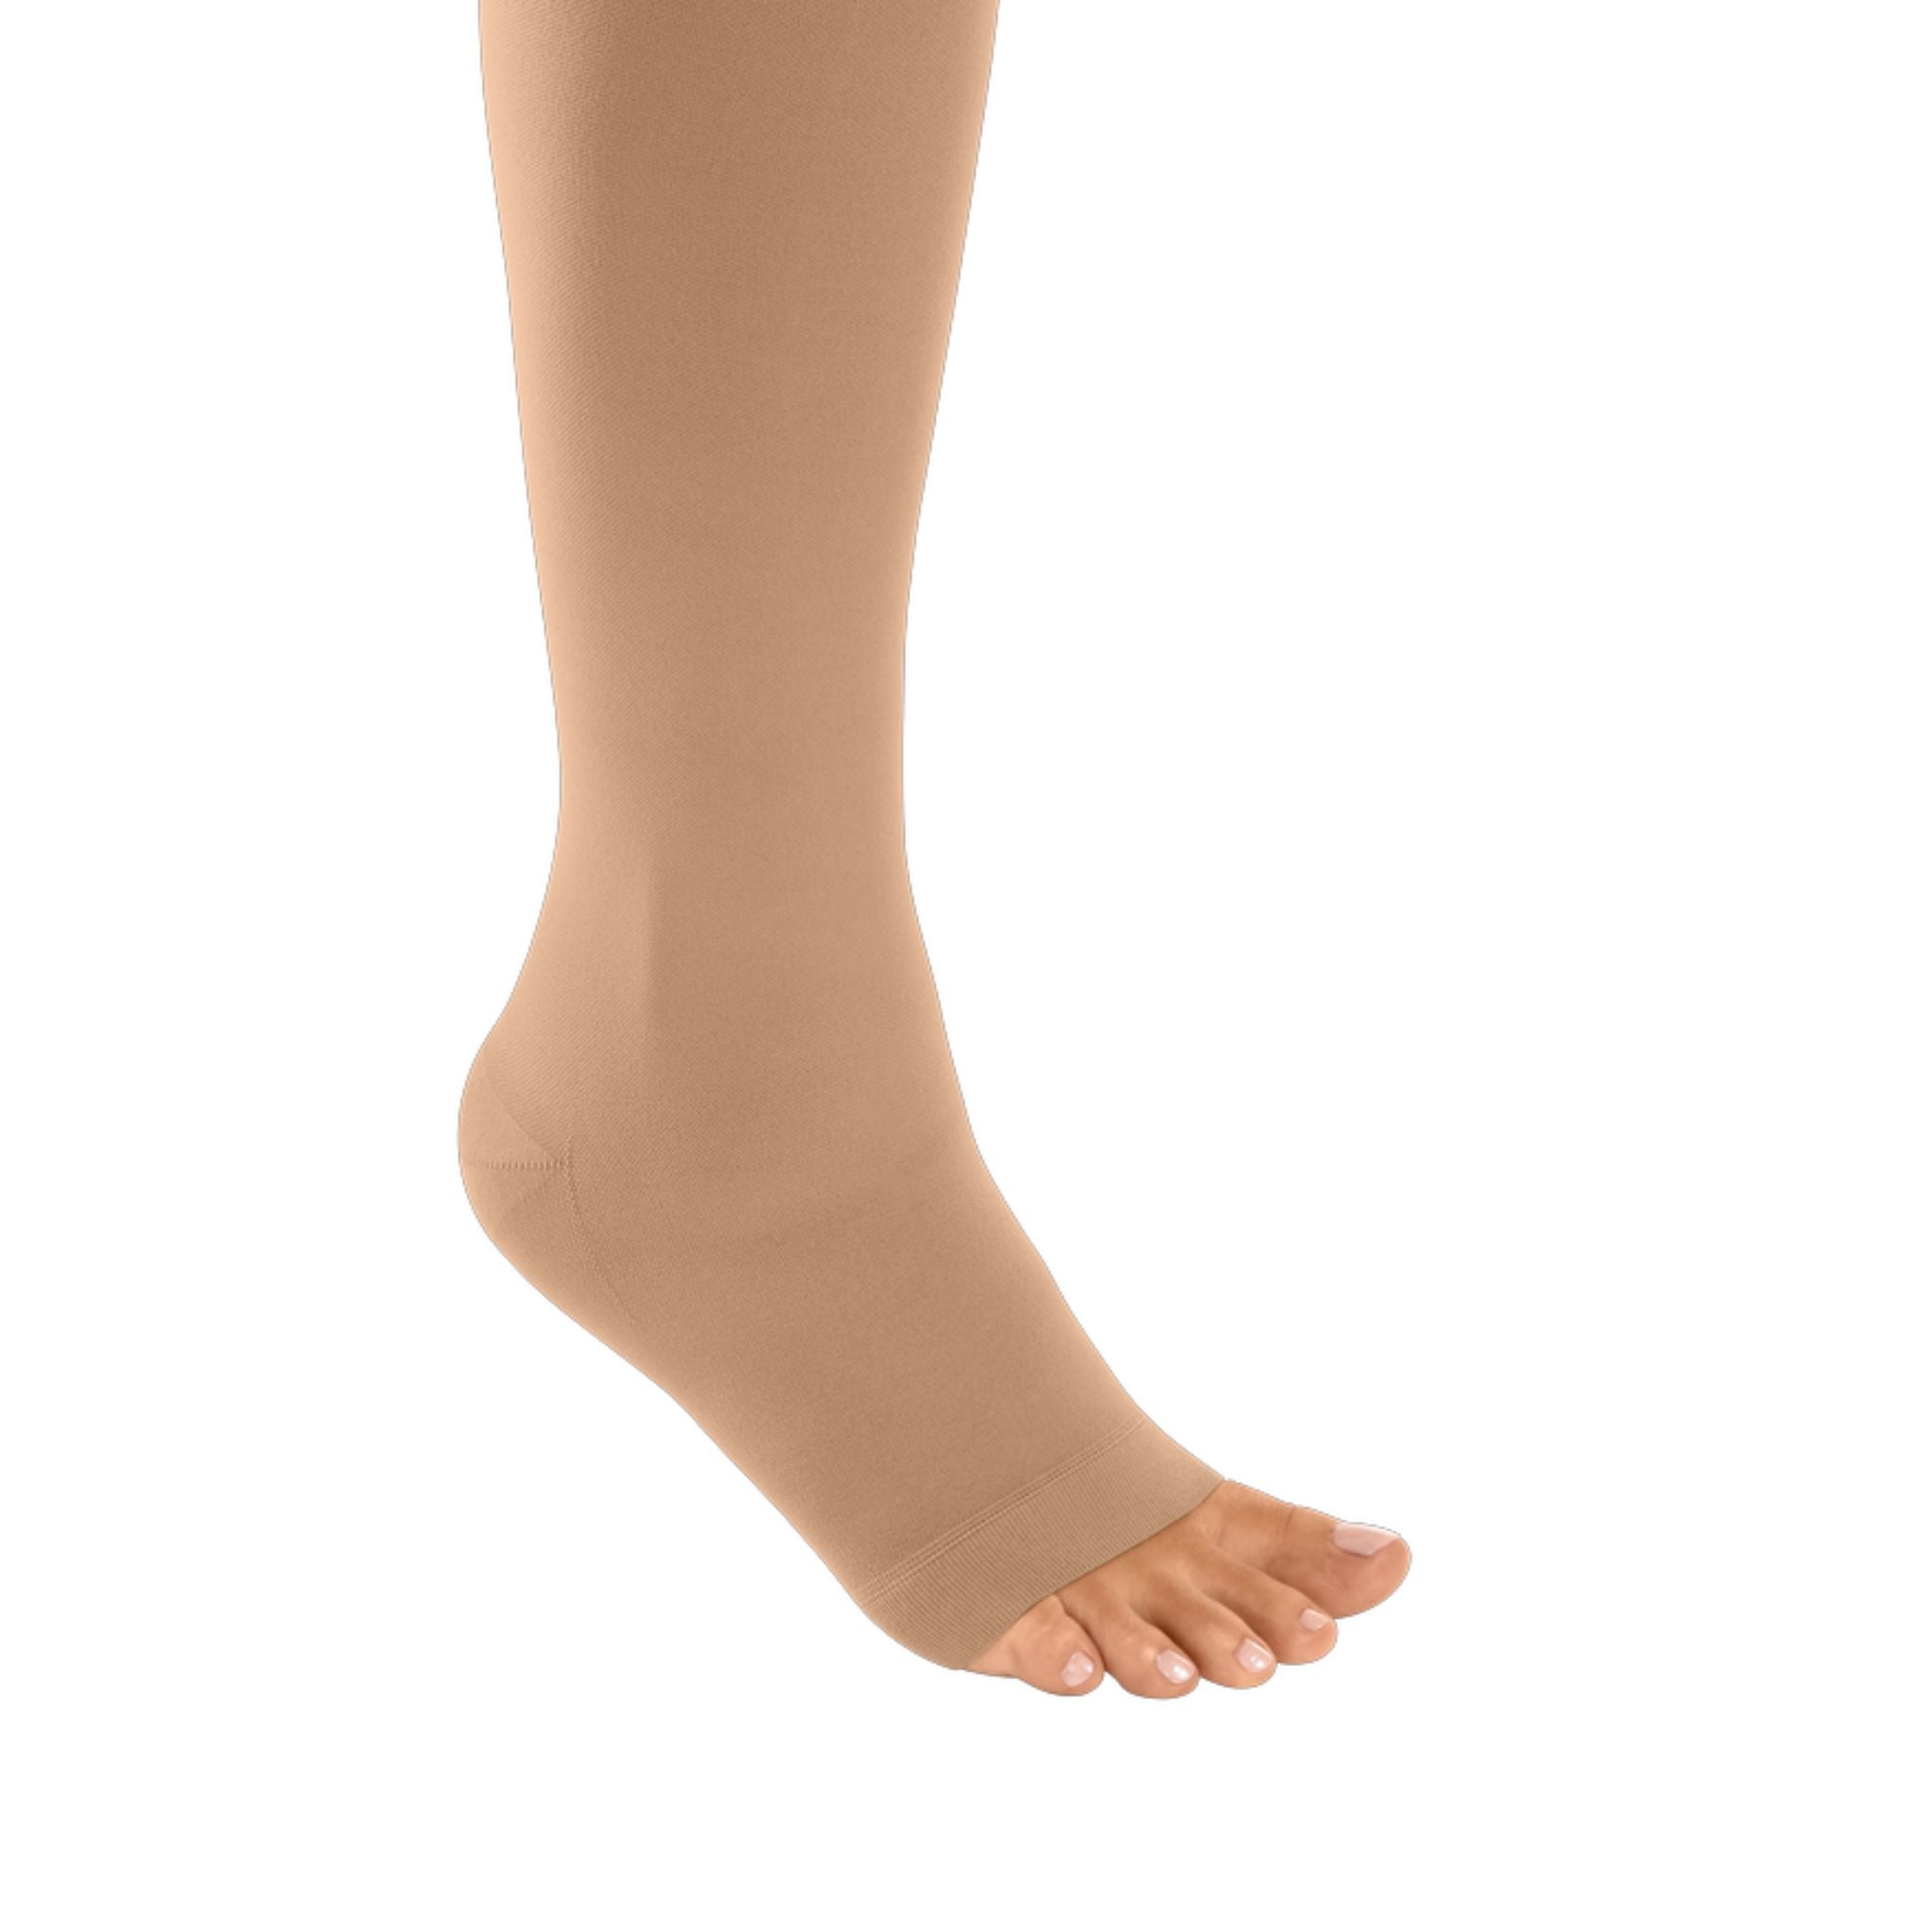 Compression Stockings  Thigh High  Sensitive Topband Wide  Open Toe  Caramel  mediven cotton